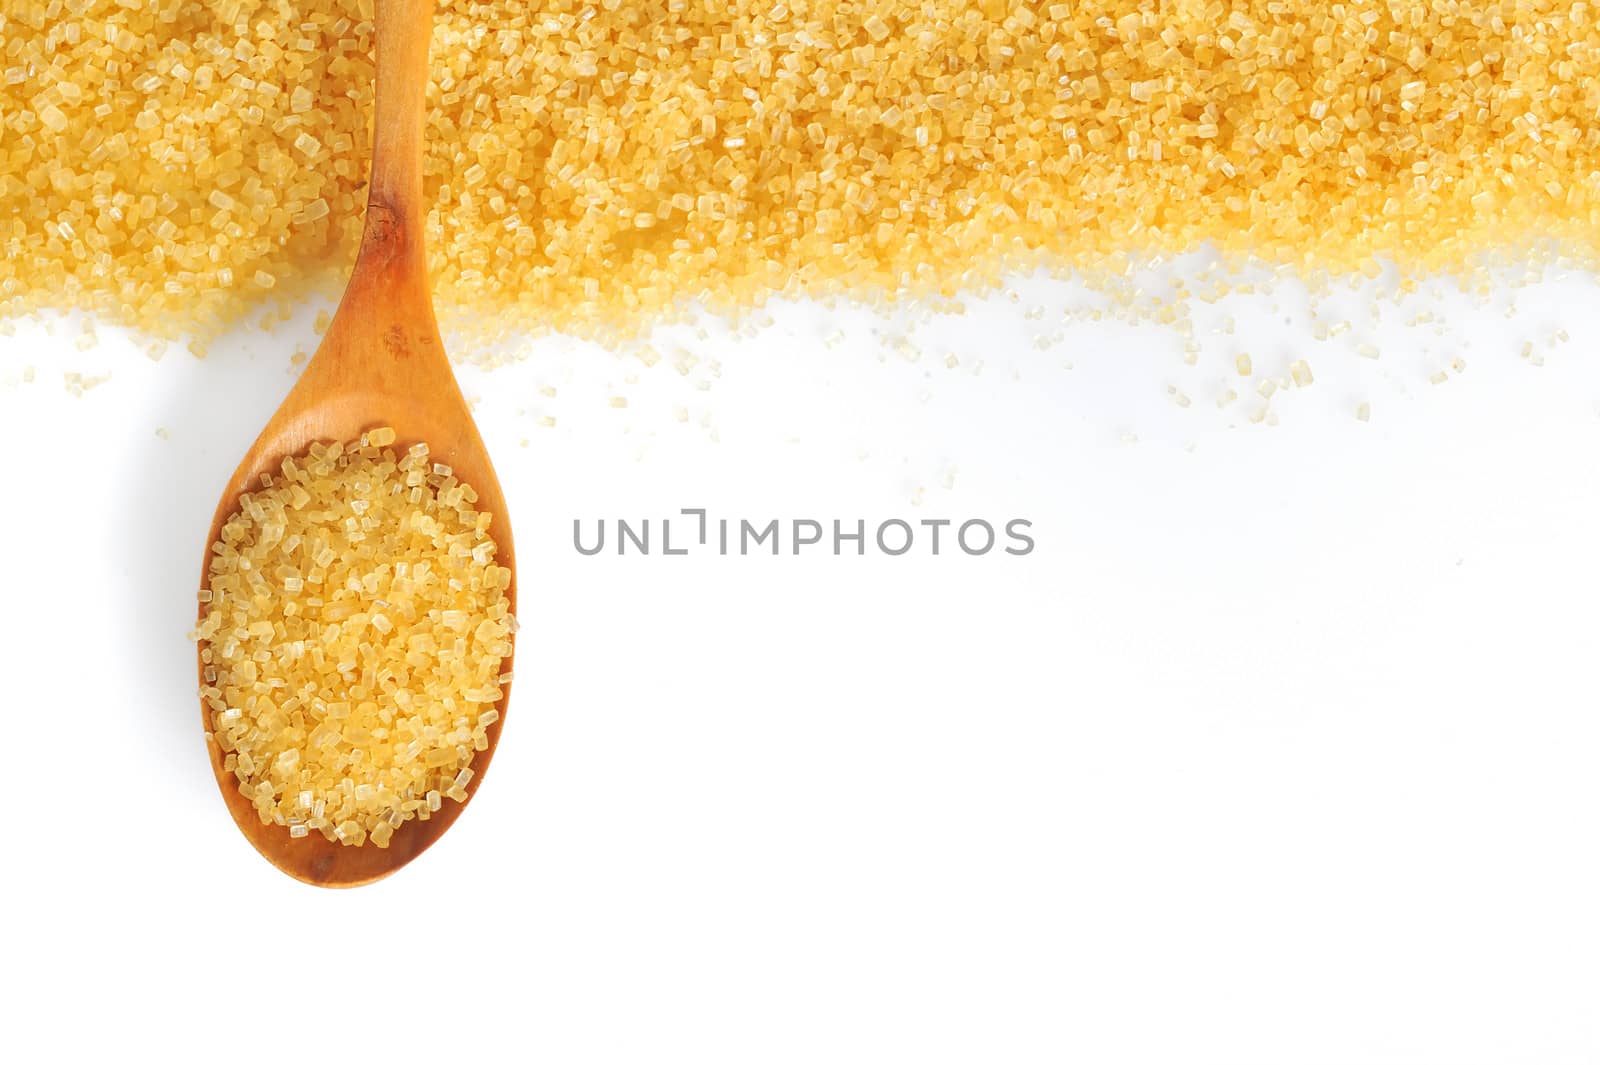 spoon and cane sugar on white background